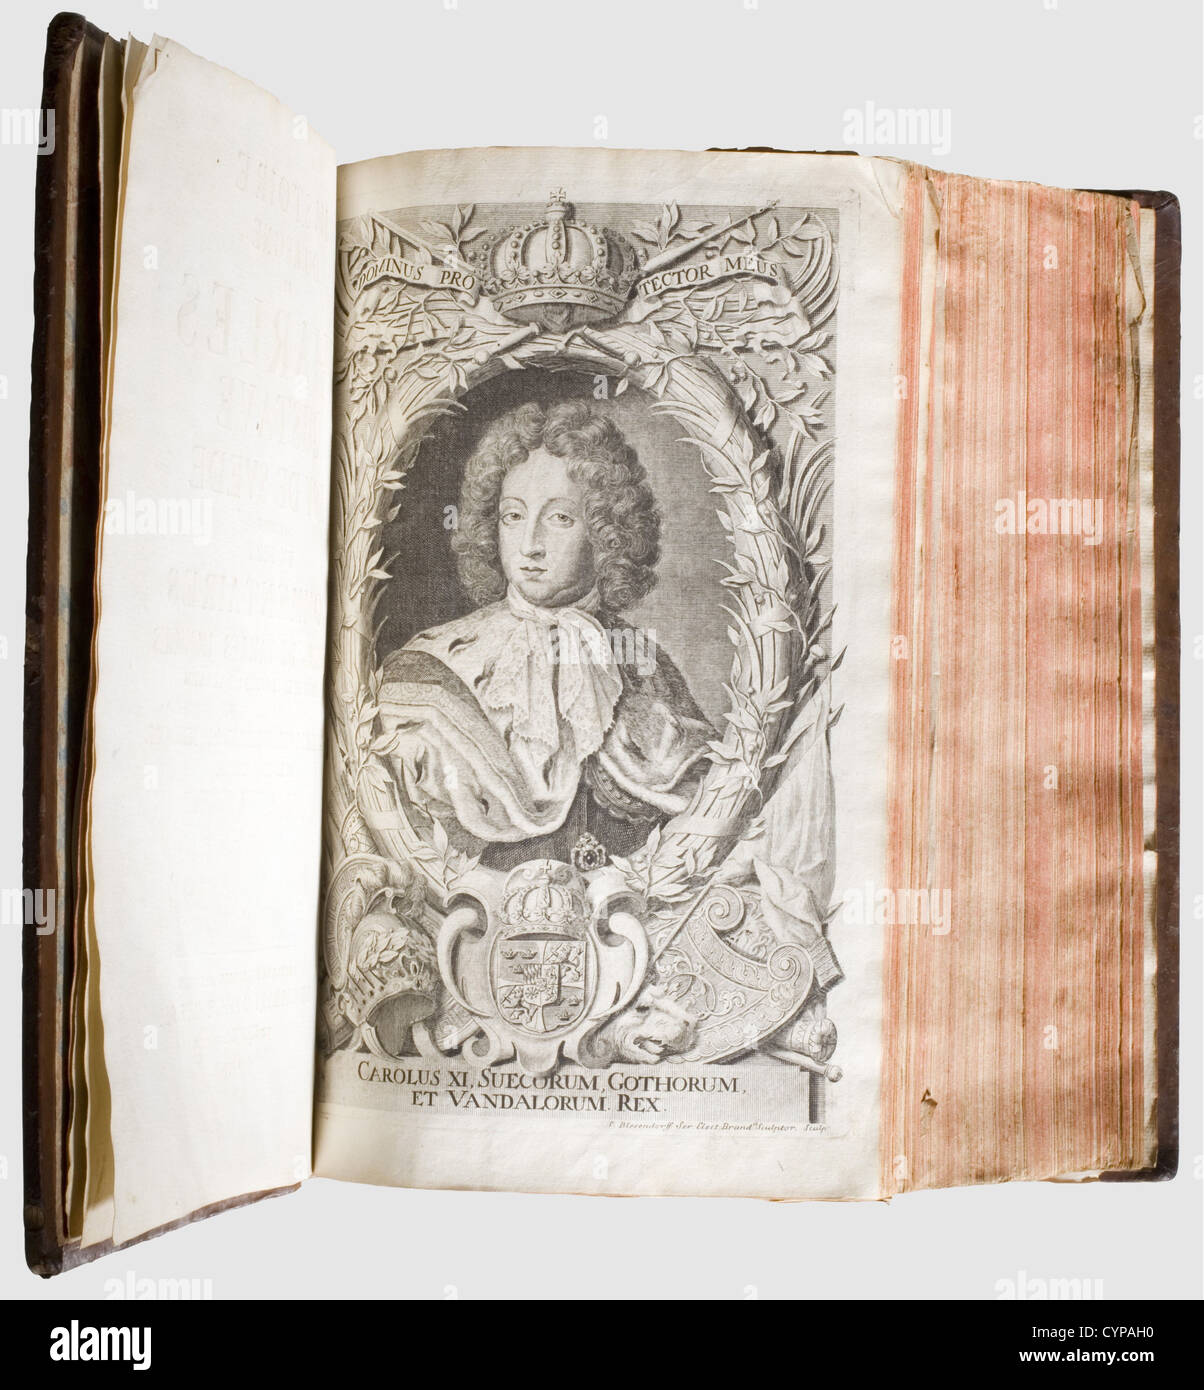 Hermann Göring - 'Histoire du Regne de Charles Gustave Roy de Svede',from his private library.Baron Saumel de Pufendorf,Christophle Riegel par Knorz Imprimeur,Nuremberg 1697.752 pages with 51 double-page copper etchings and twelve portraits,35 pages appendix and nine pages index,two loose pages,slightly yellowed and stained,some copper-etchings are missing.Old leather binding of later date with gold-embossed and titled spine.On the inside of the front cover is an early version of Hermann Göring's bookplate from the 1920s bearing his family's coat of ,Additional-Rights-Clearences-Not Available Stock Photo